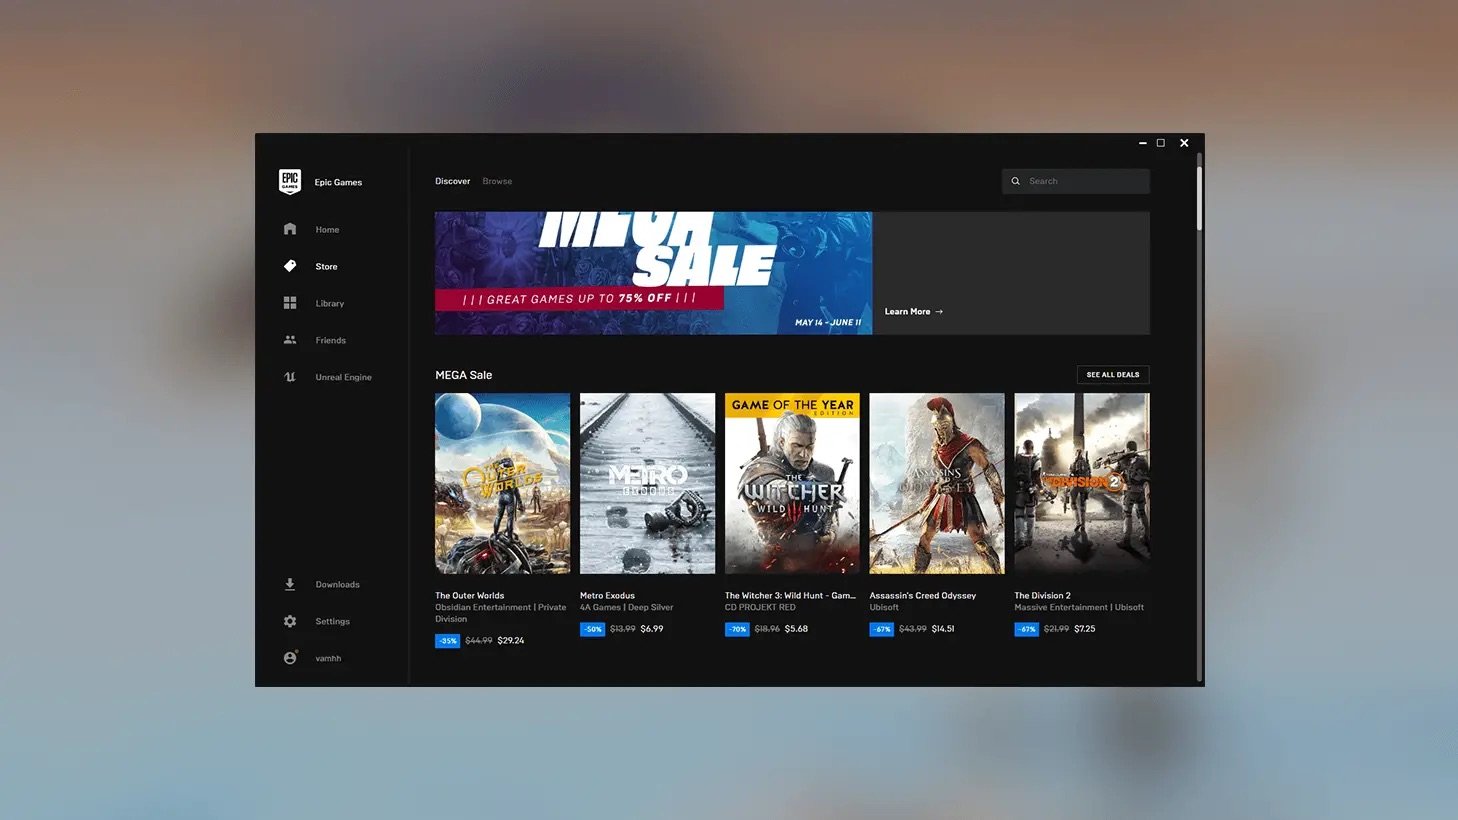 How to Fix Slow Download Speed in Epic Games Launcher on Windows